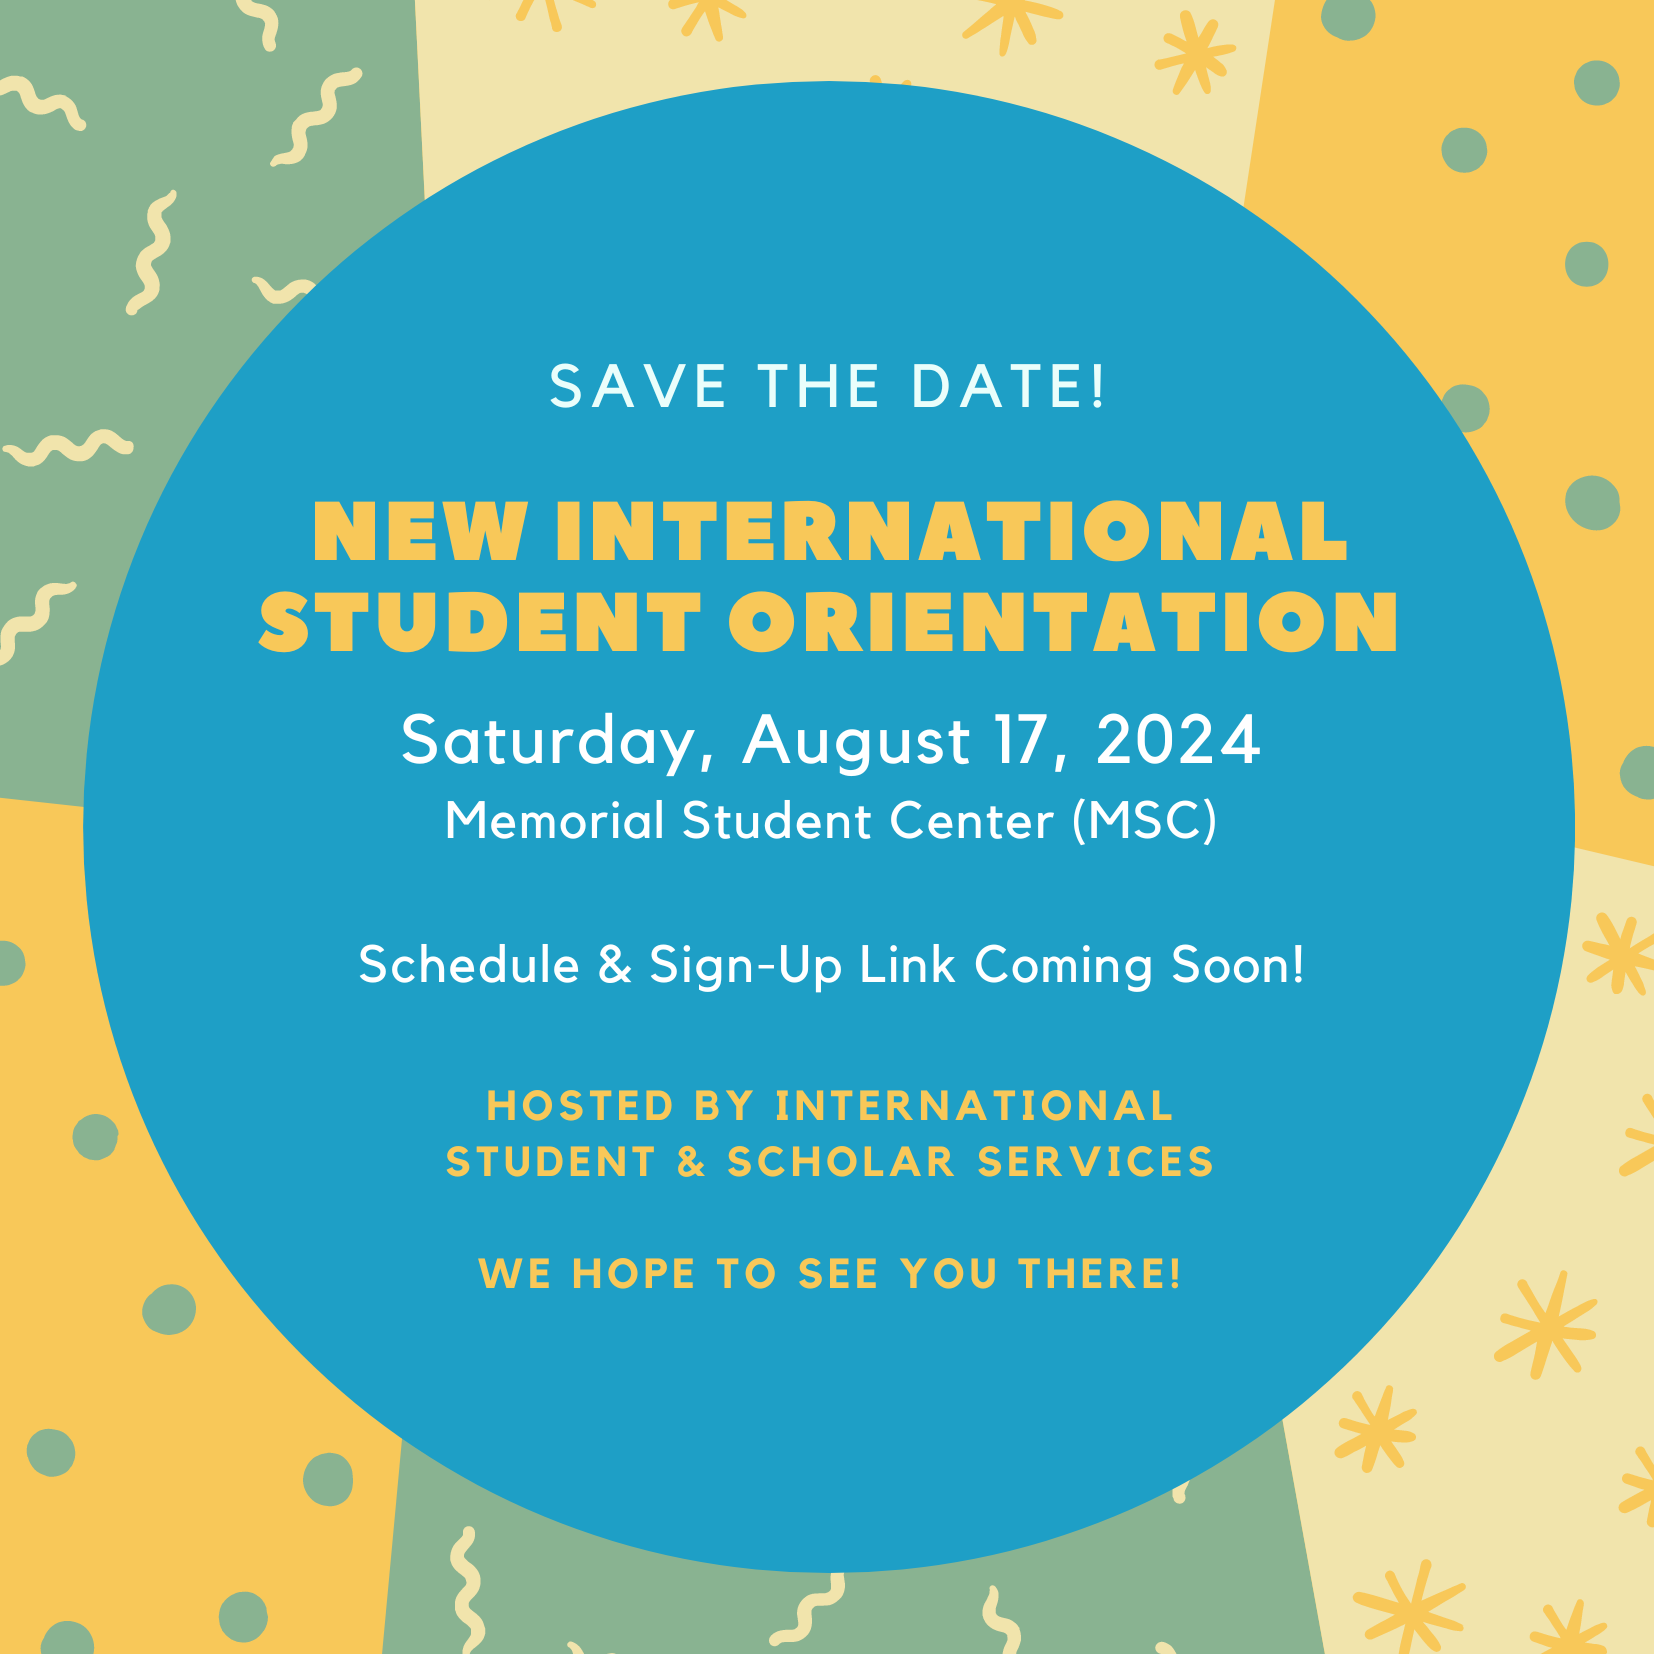 Flyer for New International Student Orientation on August 17, 2024